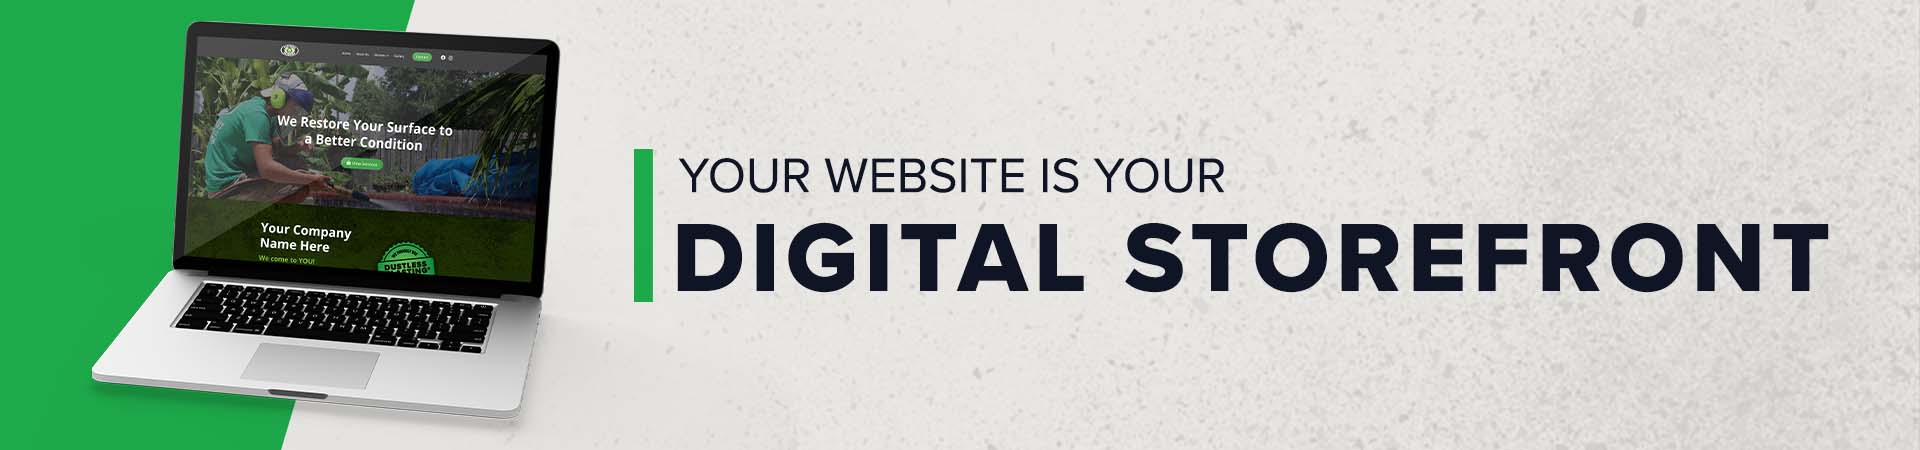 your website is your digital storefront